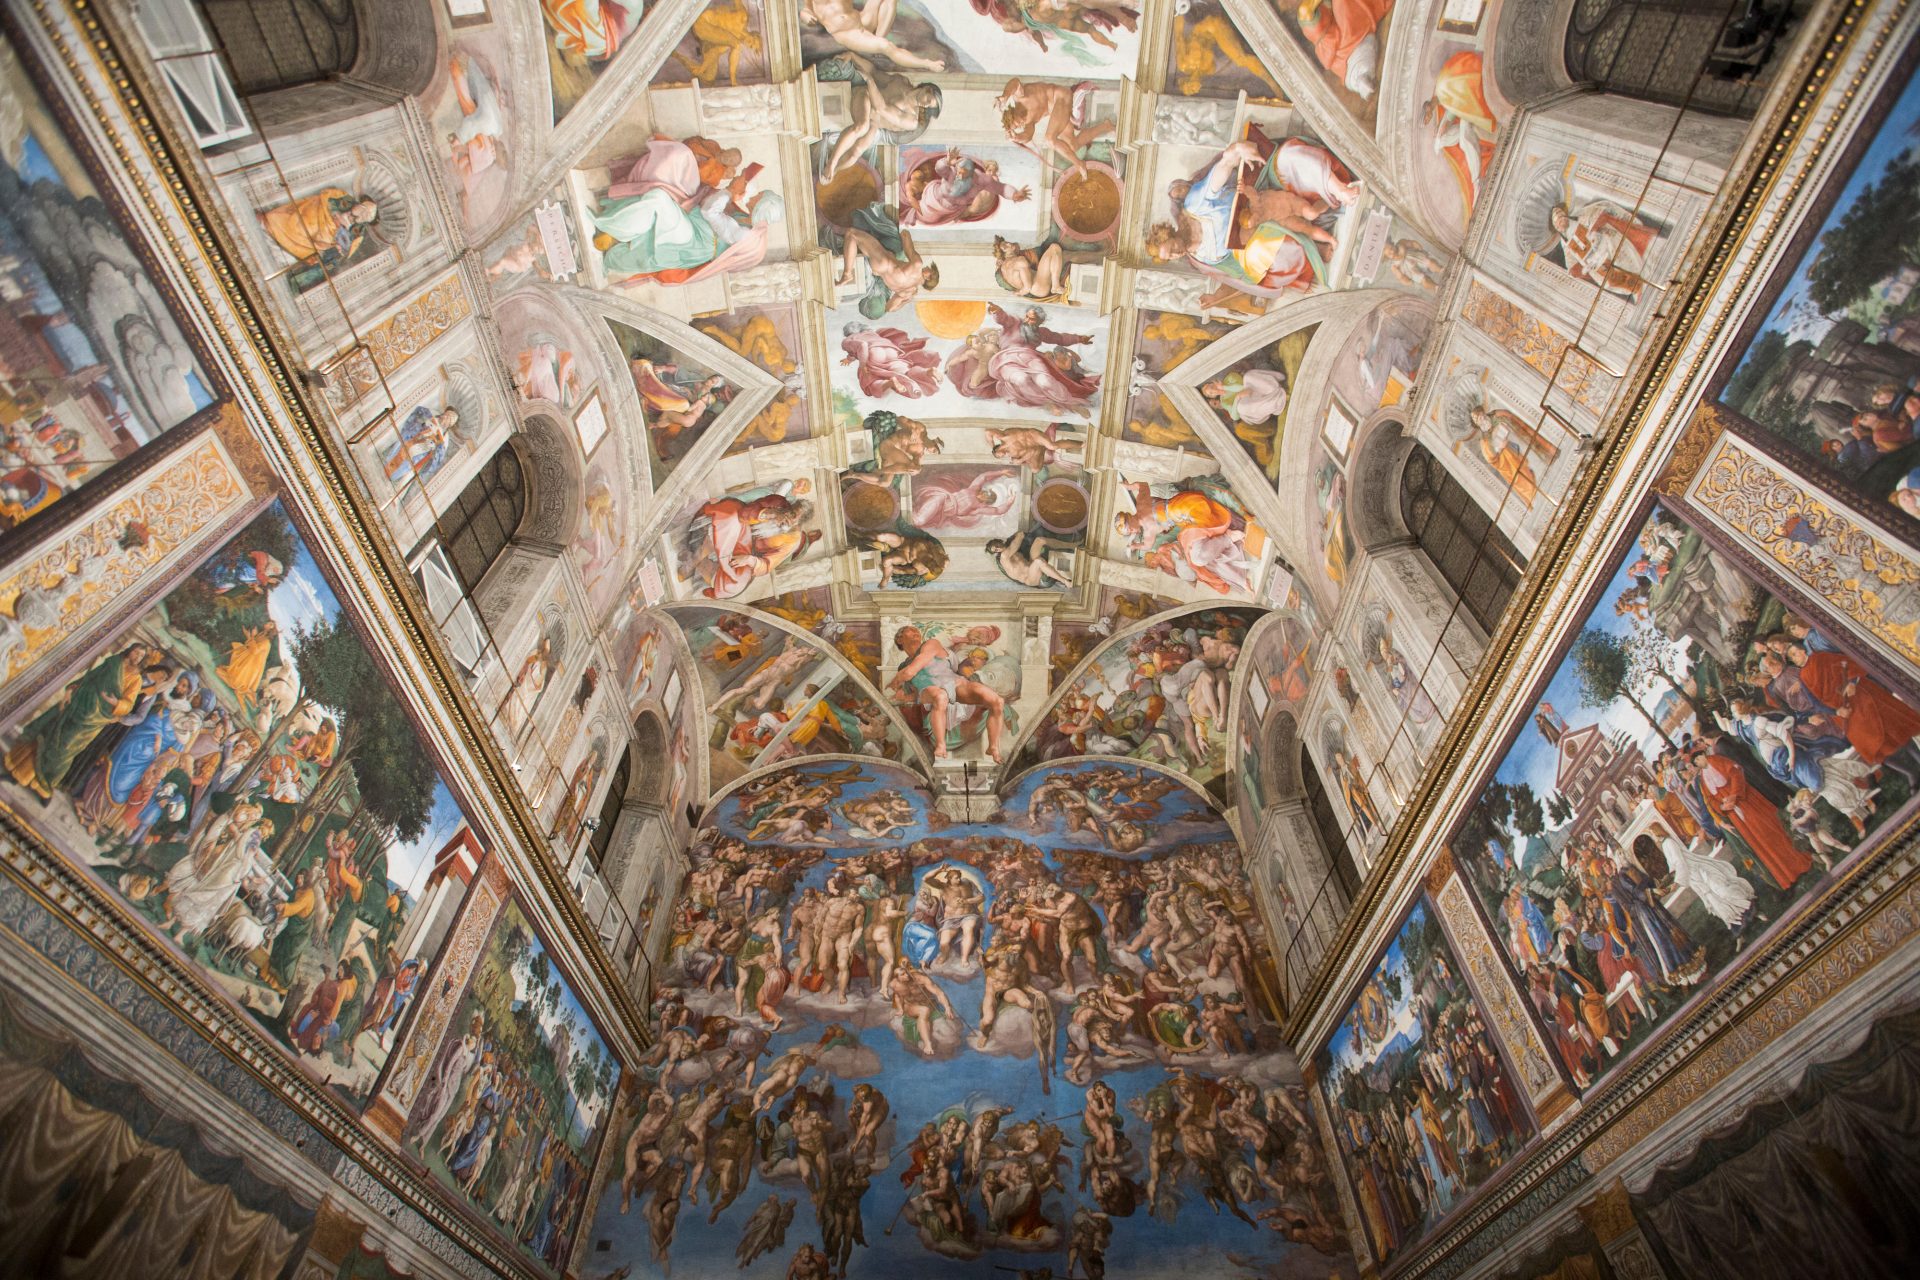 Michelangelo’s Sistine Chapel ceiling and depiction of the Last Judgment on the altar wall.